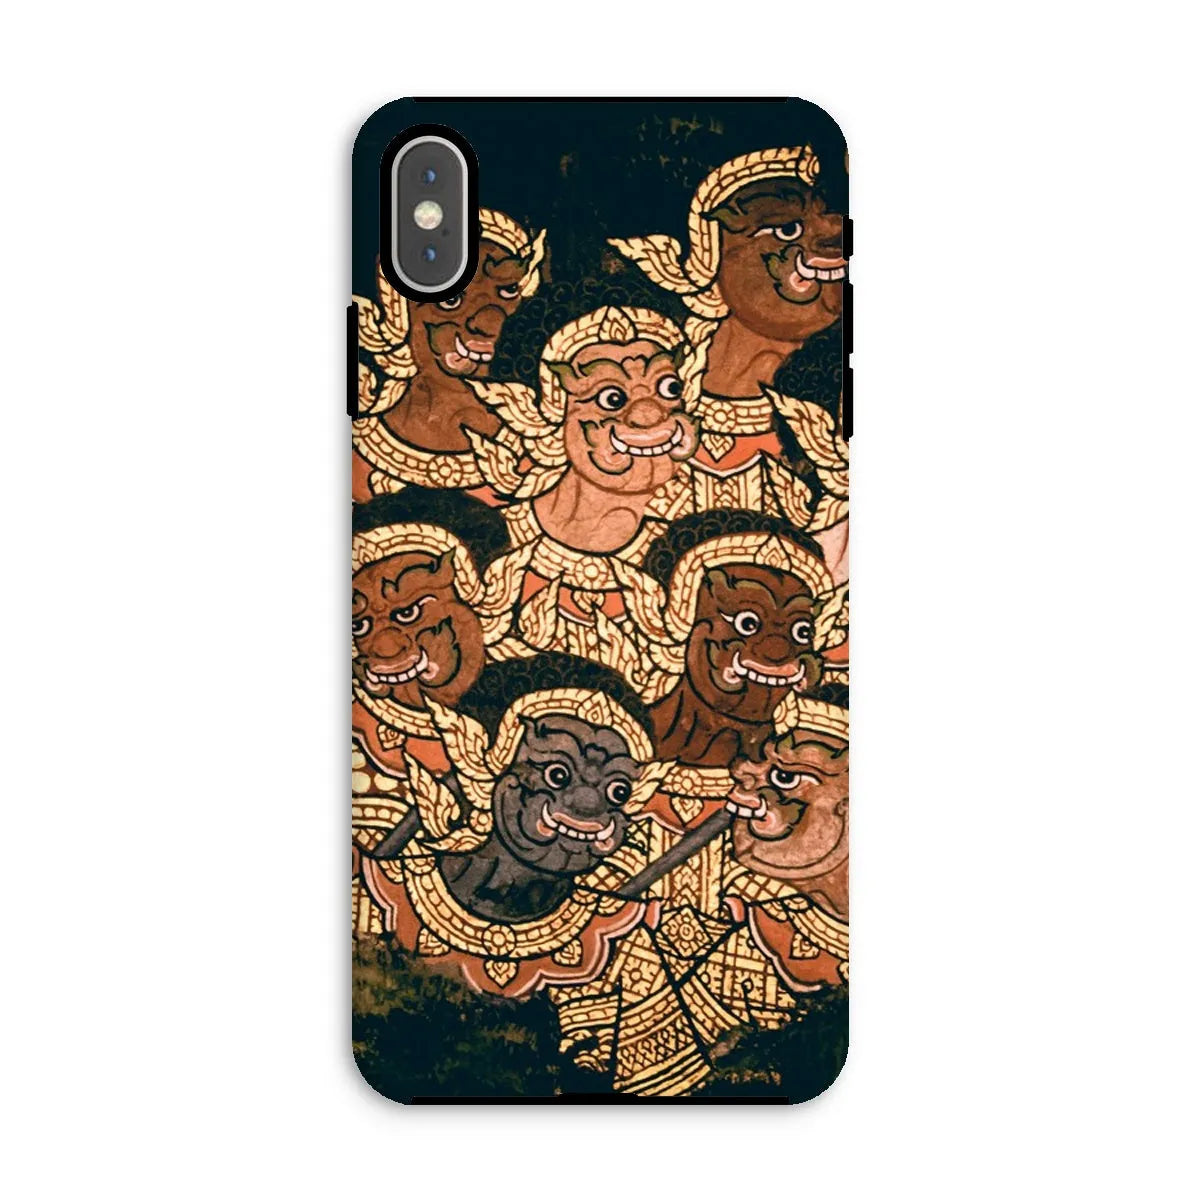 Babes In The Woods - Traditional Thai Myth Phone Case - Iphone Xs Max / Matte - Mobile Phone Cases - Aesthetic Art